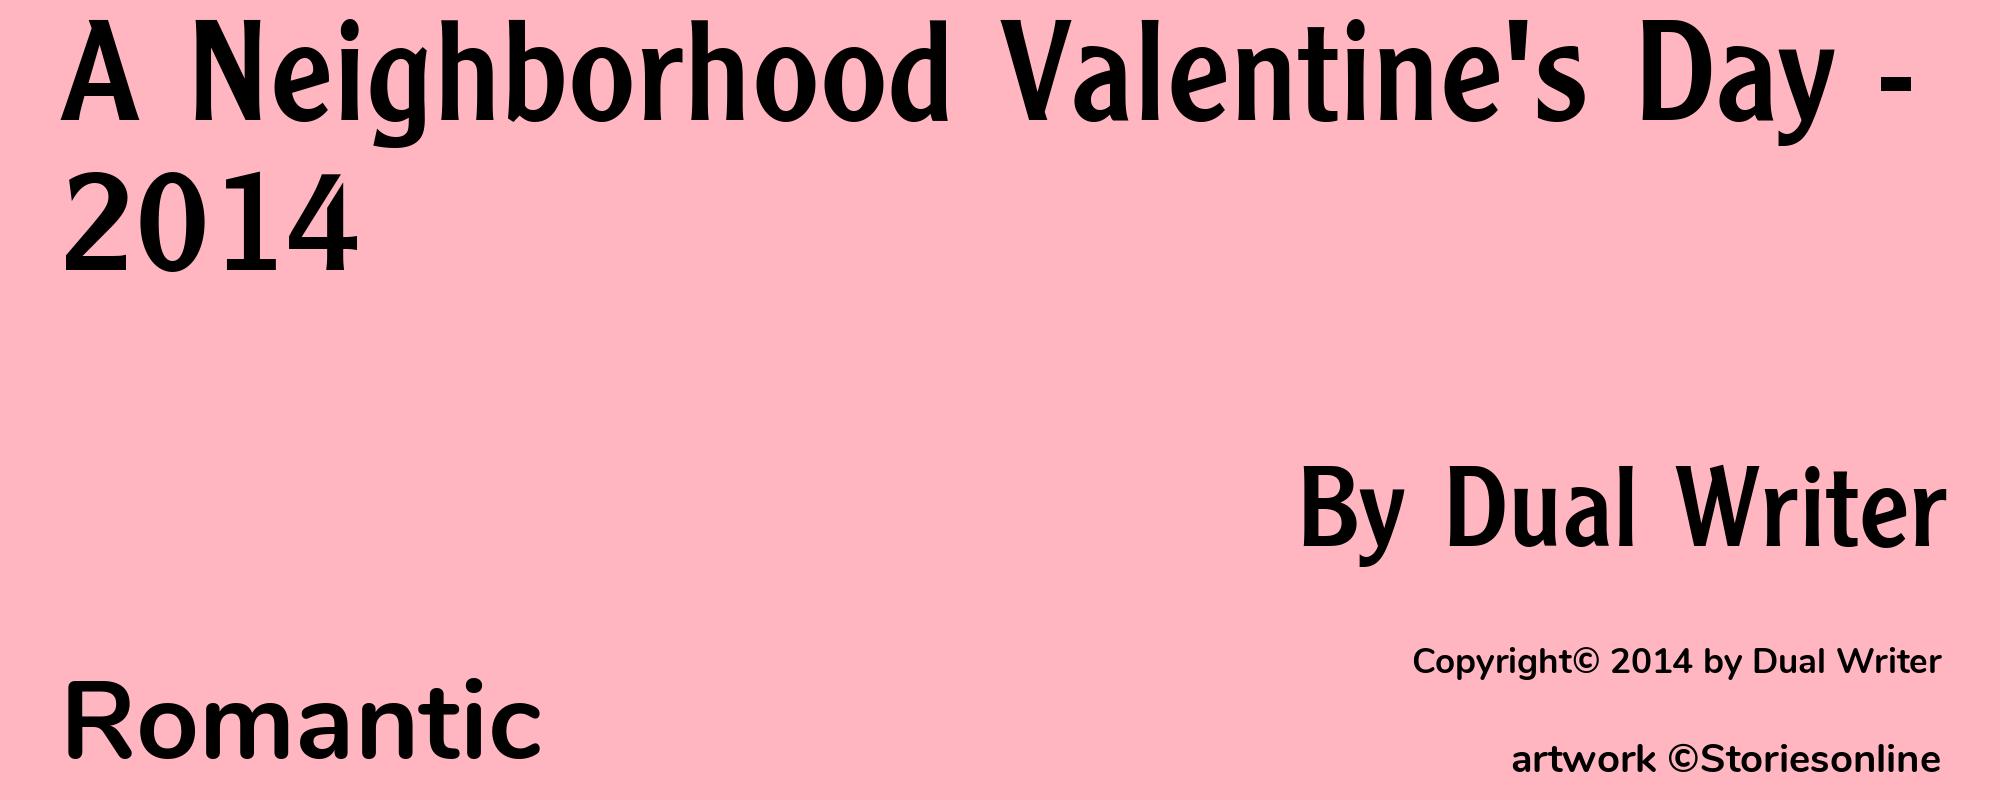 A Neighborhood Valentine's Day - 2014 - Cover